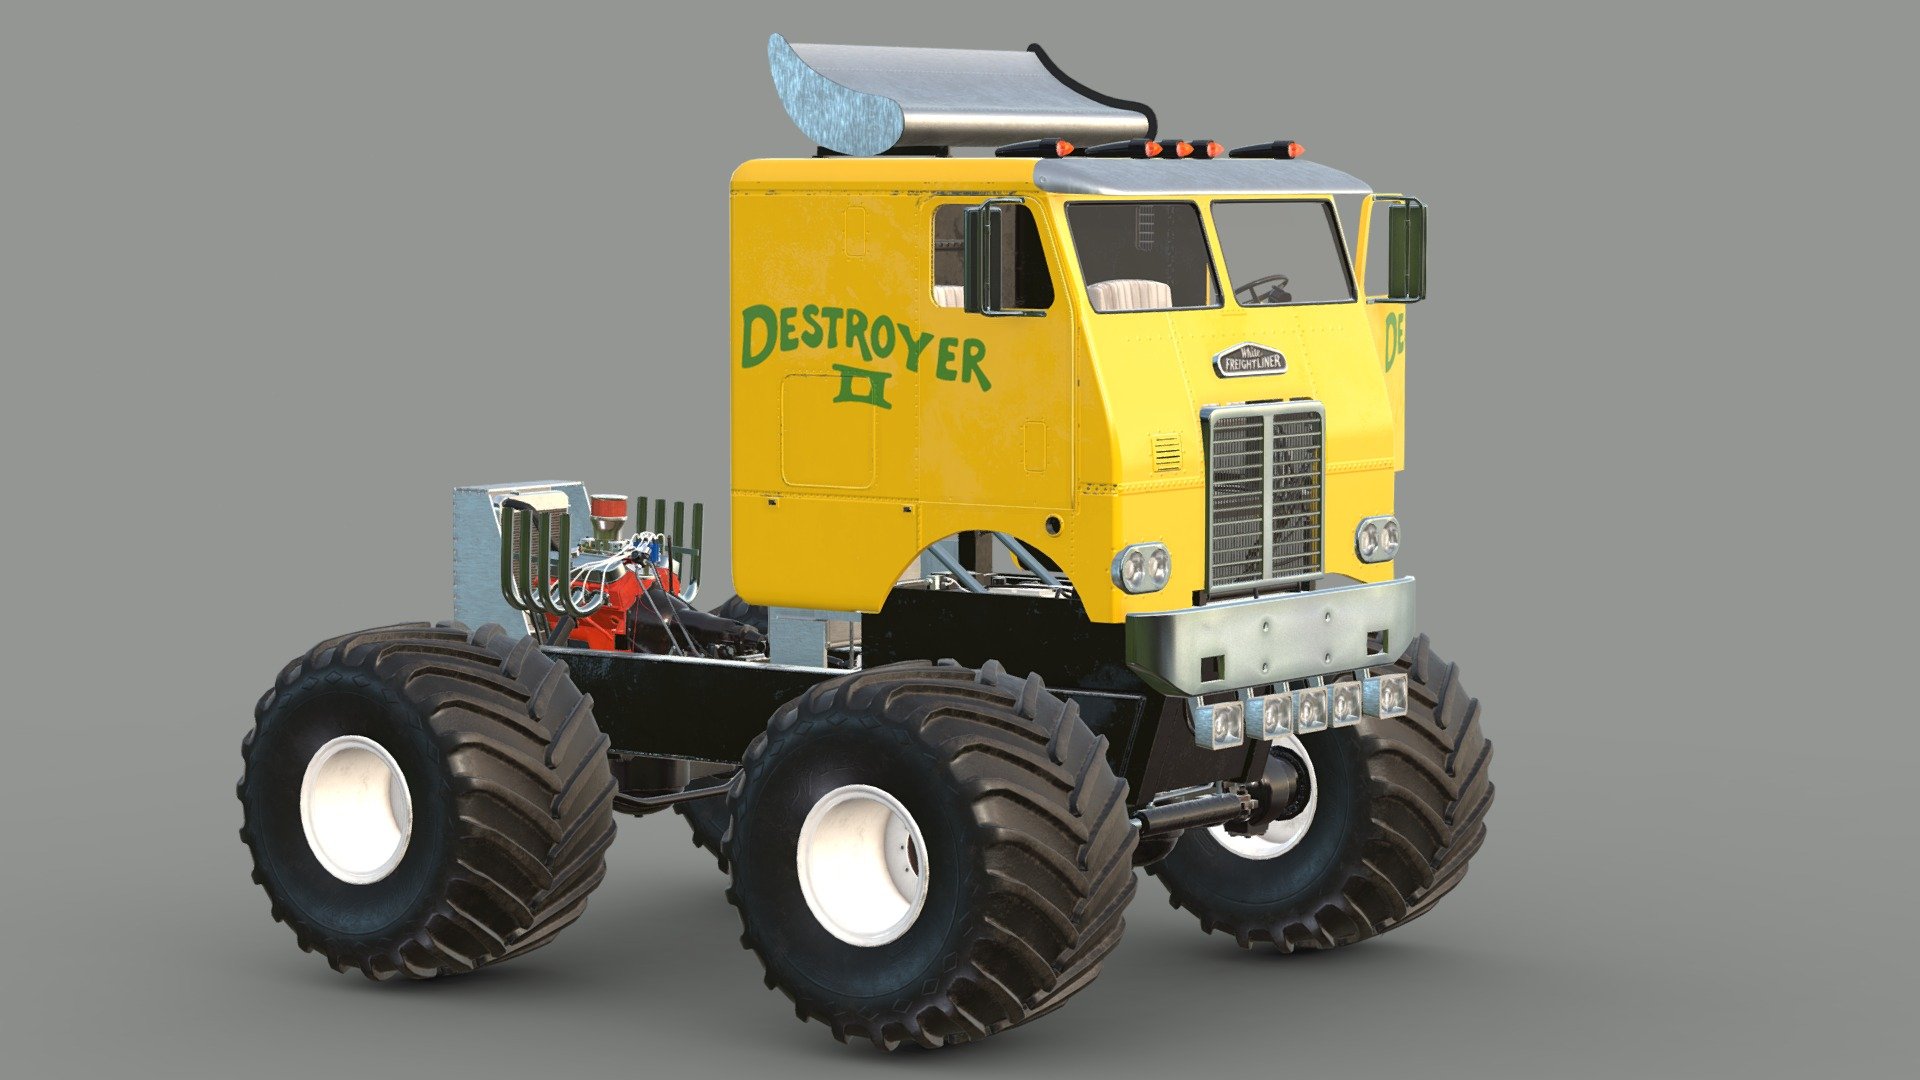 This is not proper model of Destroyer II monster truck, but just D1 with D2 coat. At some point I will create proper D2 too, which had chassis similar to Super Pete, much lower driver placement and fiberglass body.

Here is model of D1:

https://sketchfab.com/3d-models/destroyer-1-monster-truck-3c3c50c68dd54c6bac6280f0f26b0c09 - D1 with Destroyer II -paintjob - 3D model by Jorma Rysky (@Rysky) 3d model